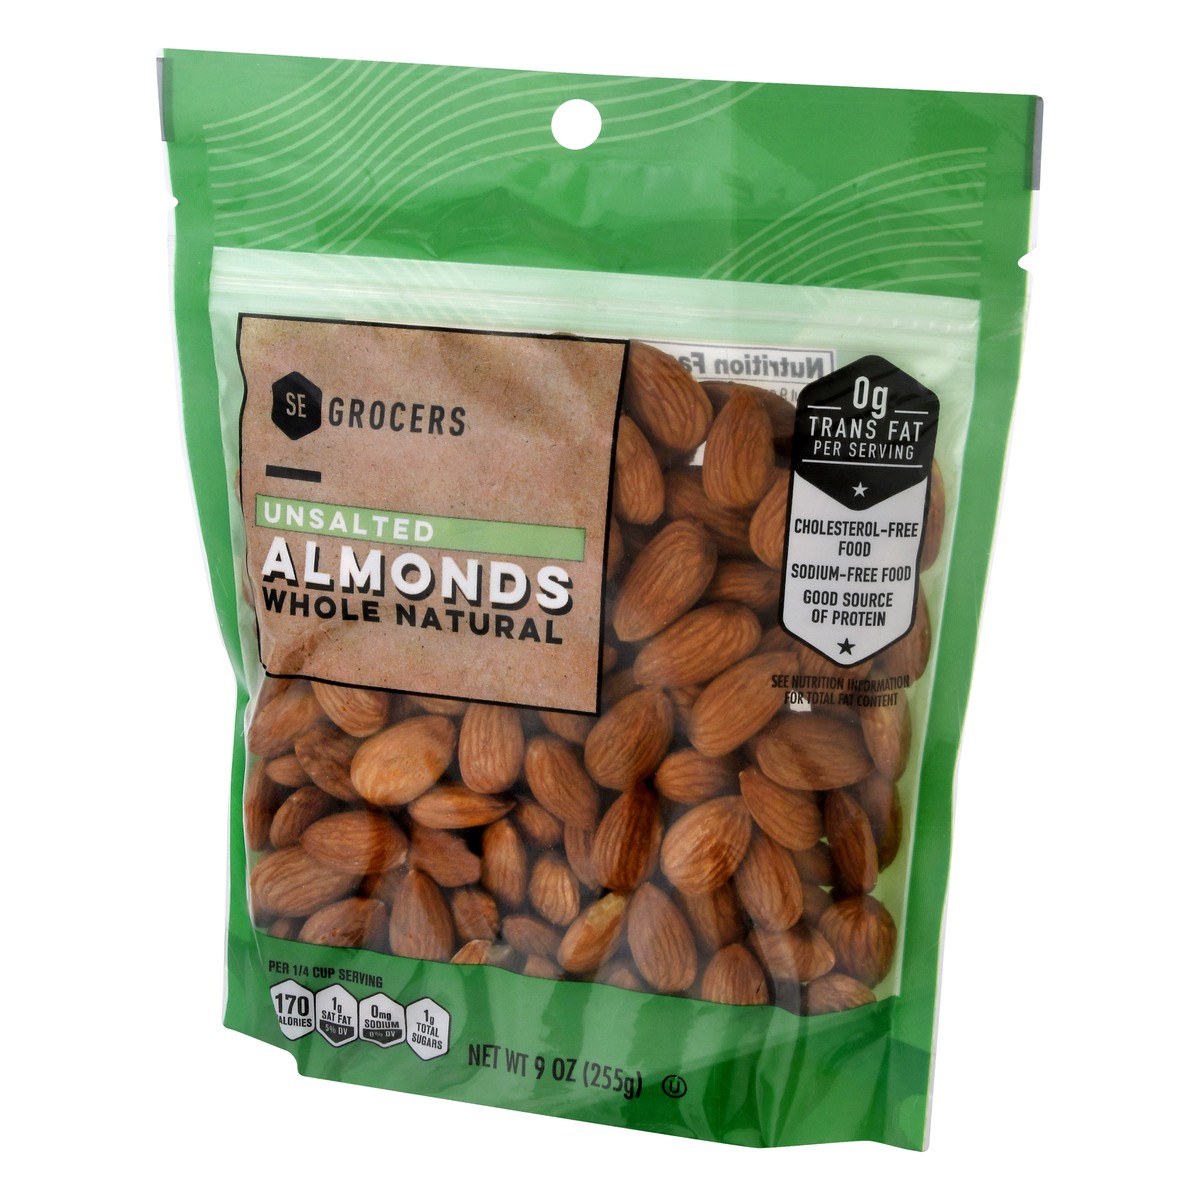 slide 3 of 10, SE Grocers Unsalted Almonds Whole Natural, 9 oz